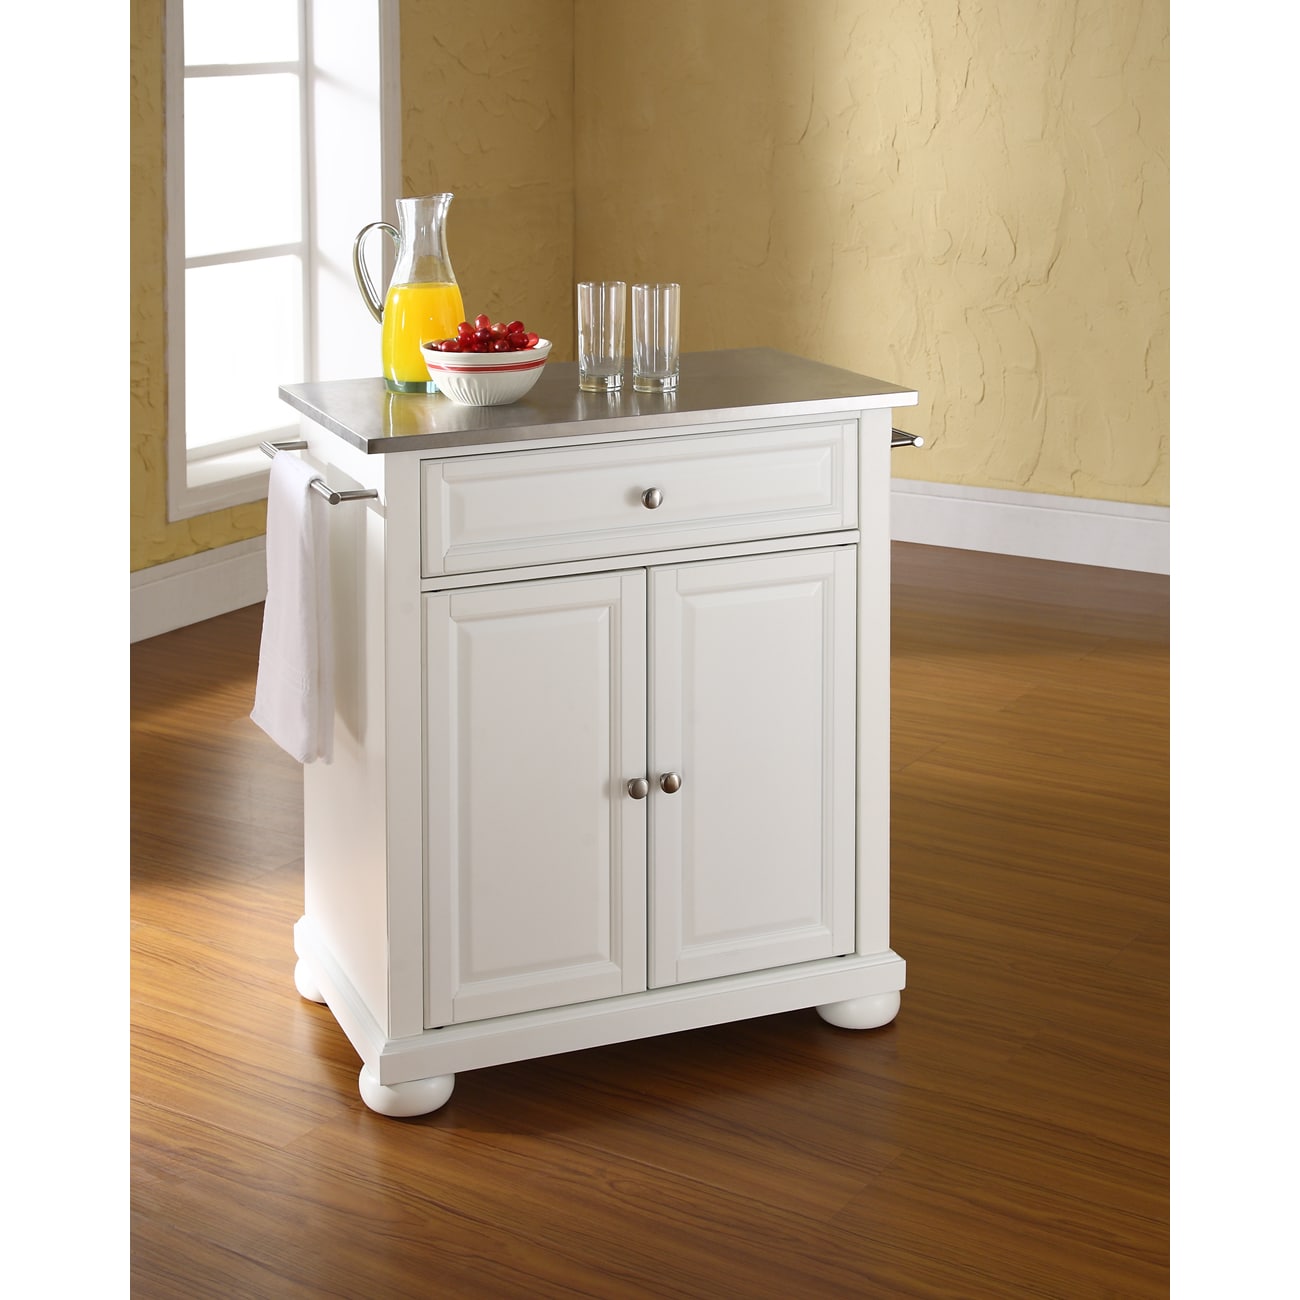 Alexandria White Wood Portable Kitchen Island With Stainless Steel